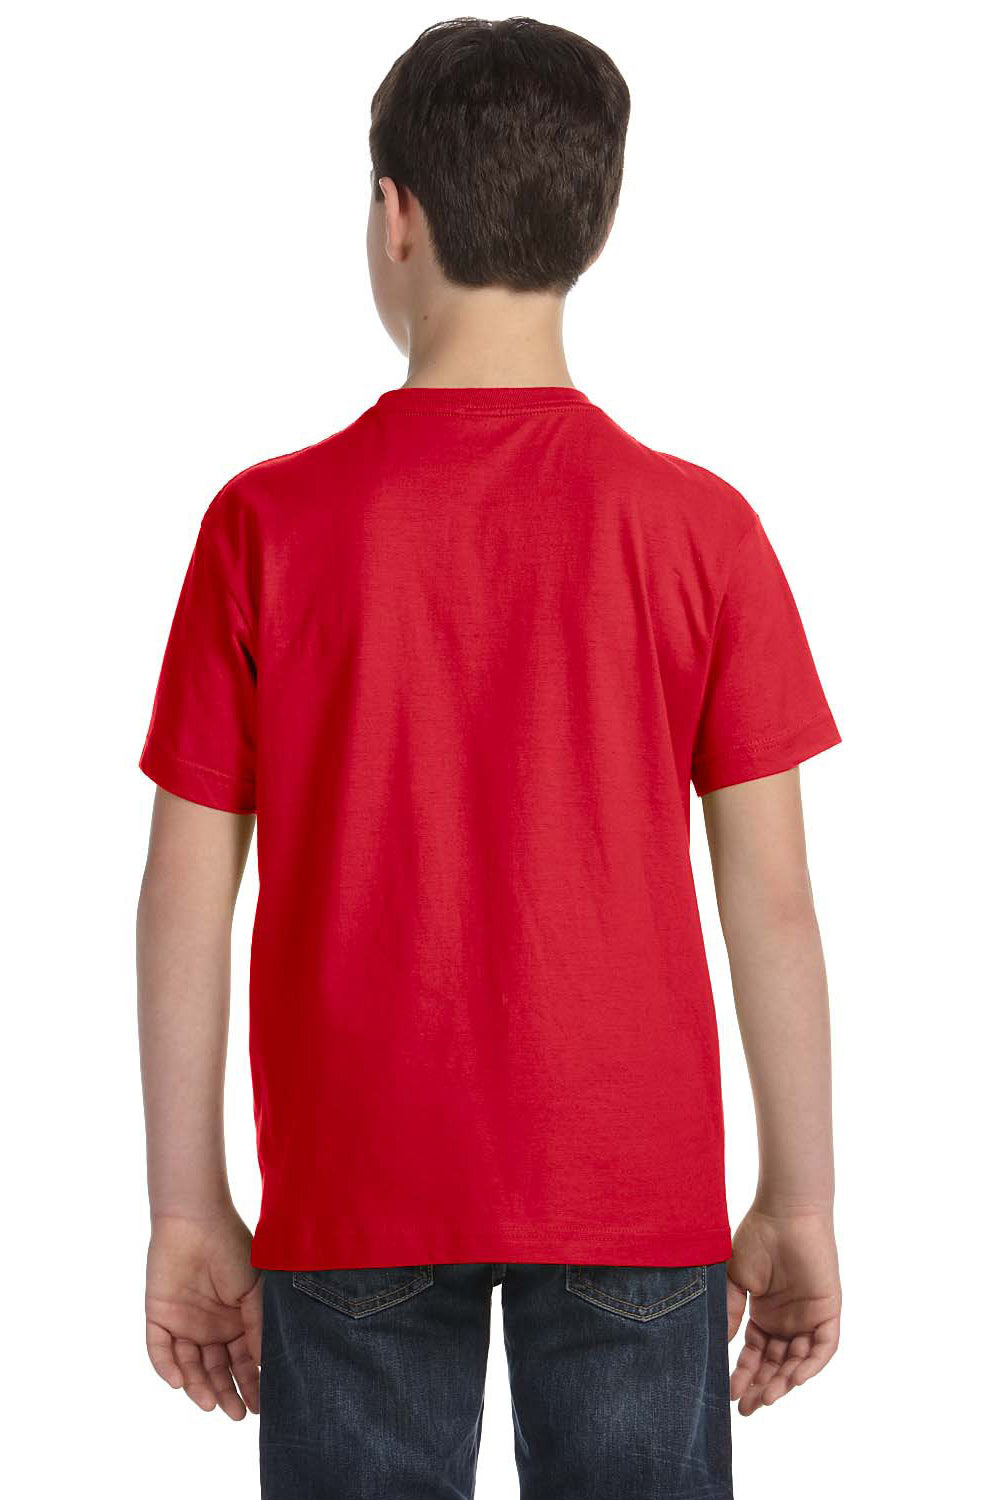 LAT 6101 Youth Fine Jersey Short Sleeve Crewneck T-Shirt Red Back